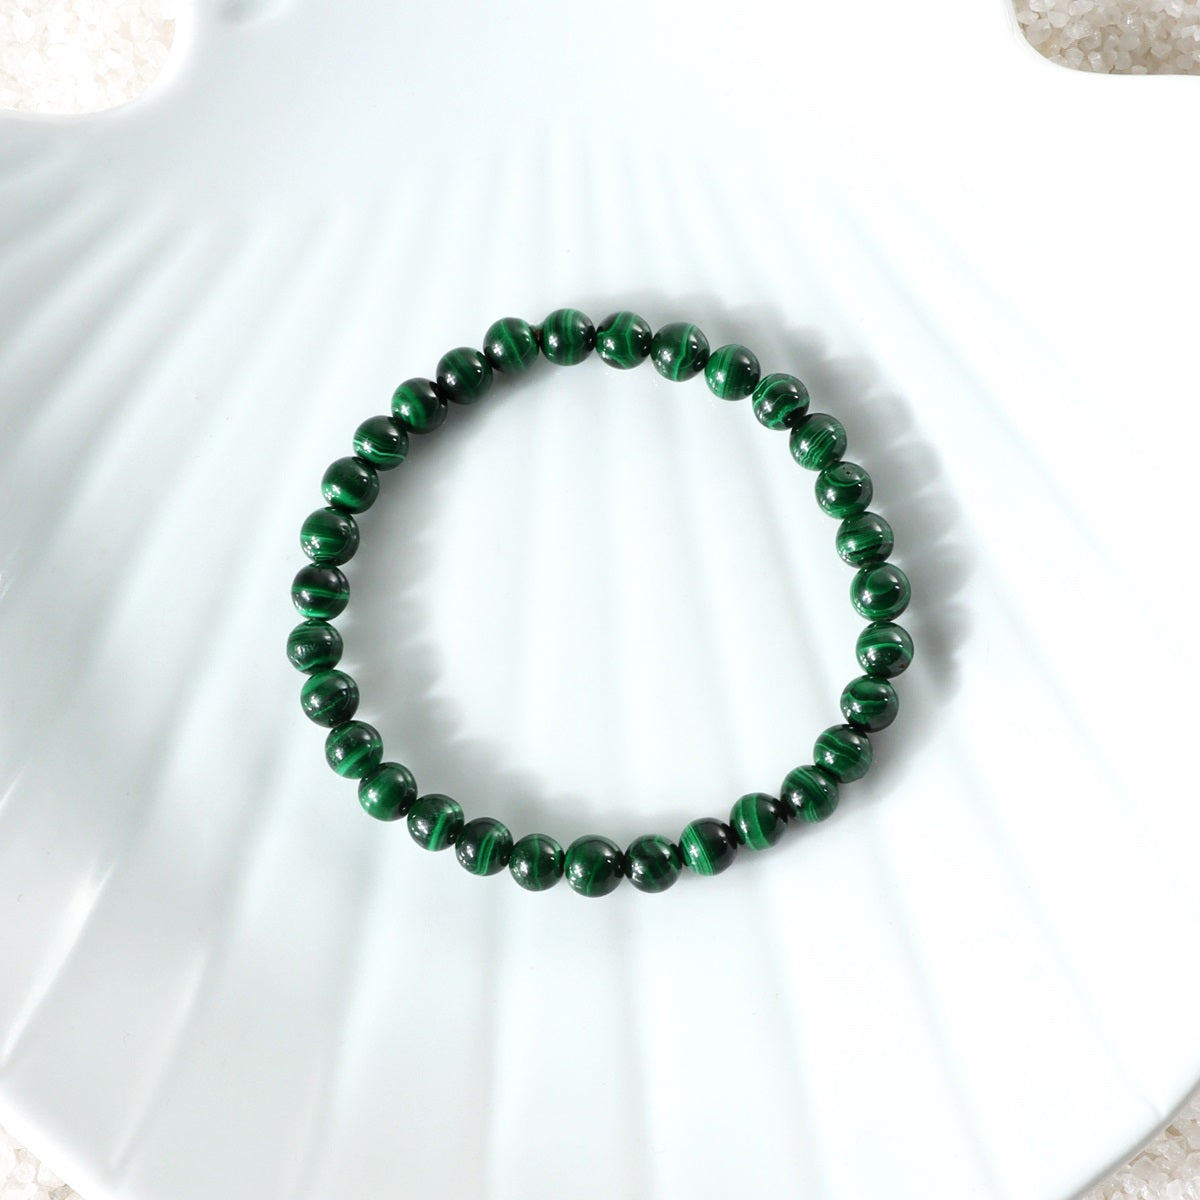 Various styling ideas for the Malachite Stretch Bracelet, showcasing its versatile and fashionable appeal for everyday wear.